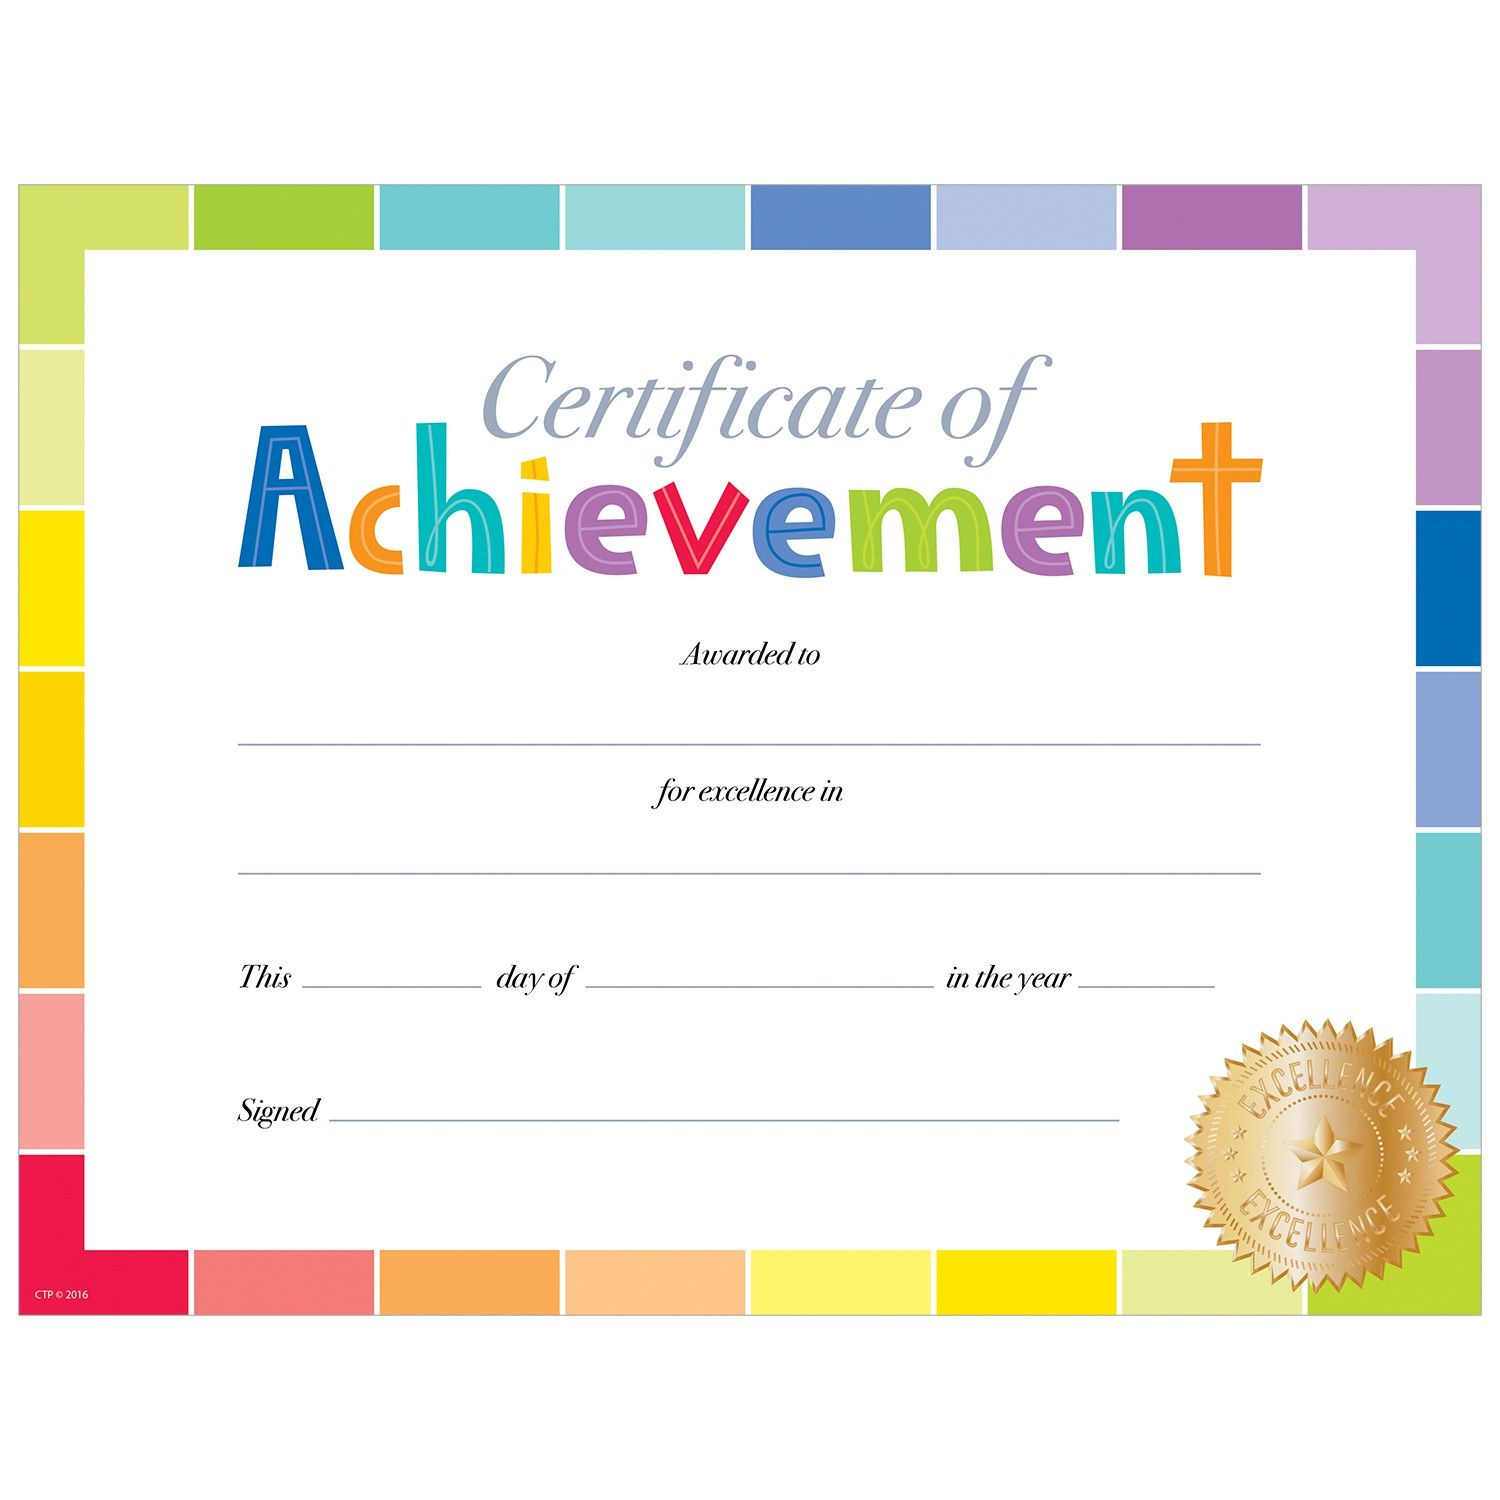 Pindanit Levi On מסגרות | Certificate Of Achievement, Award regarding Certificate Of Achievement Template For Kids